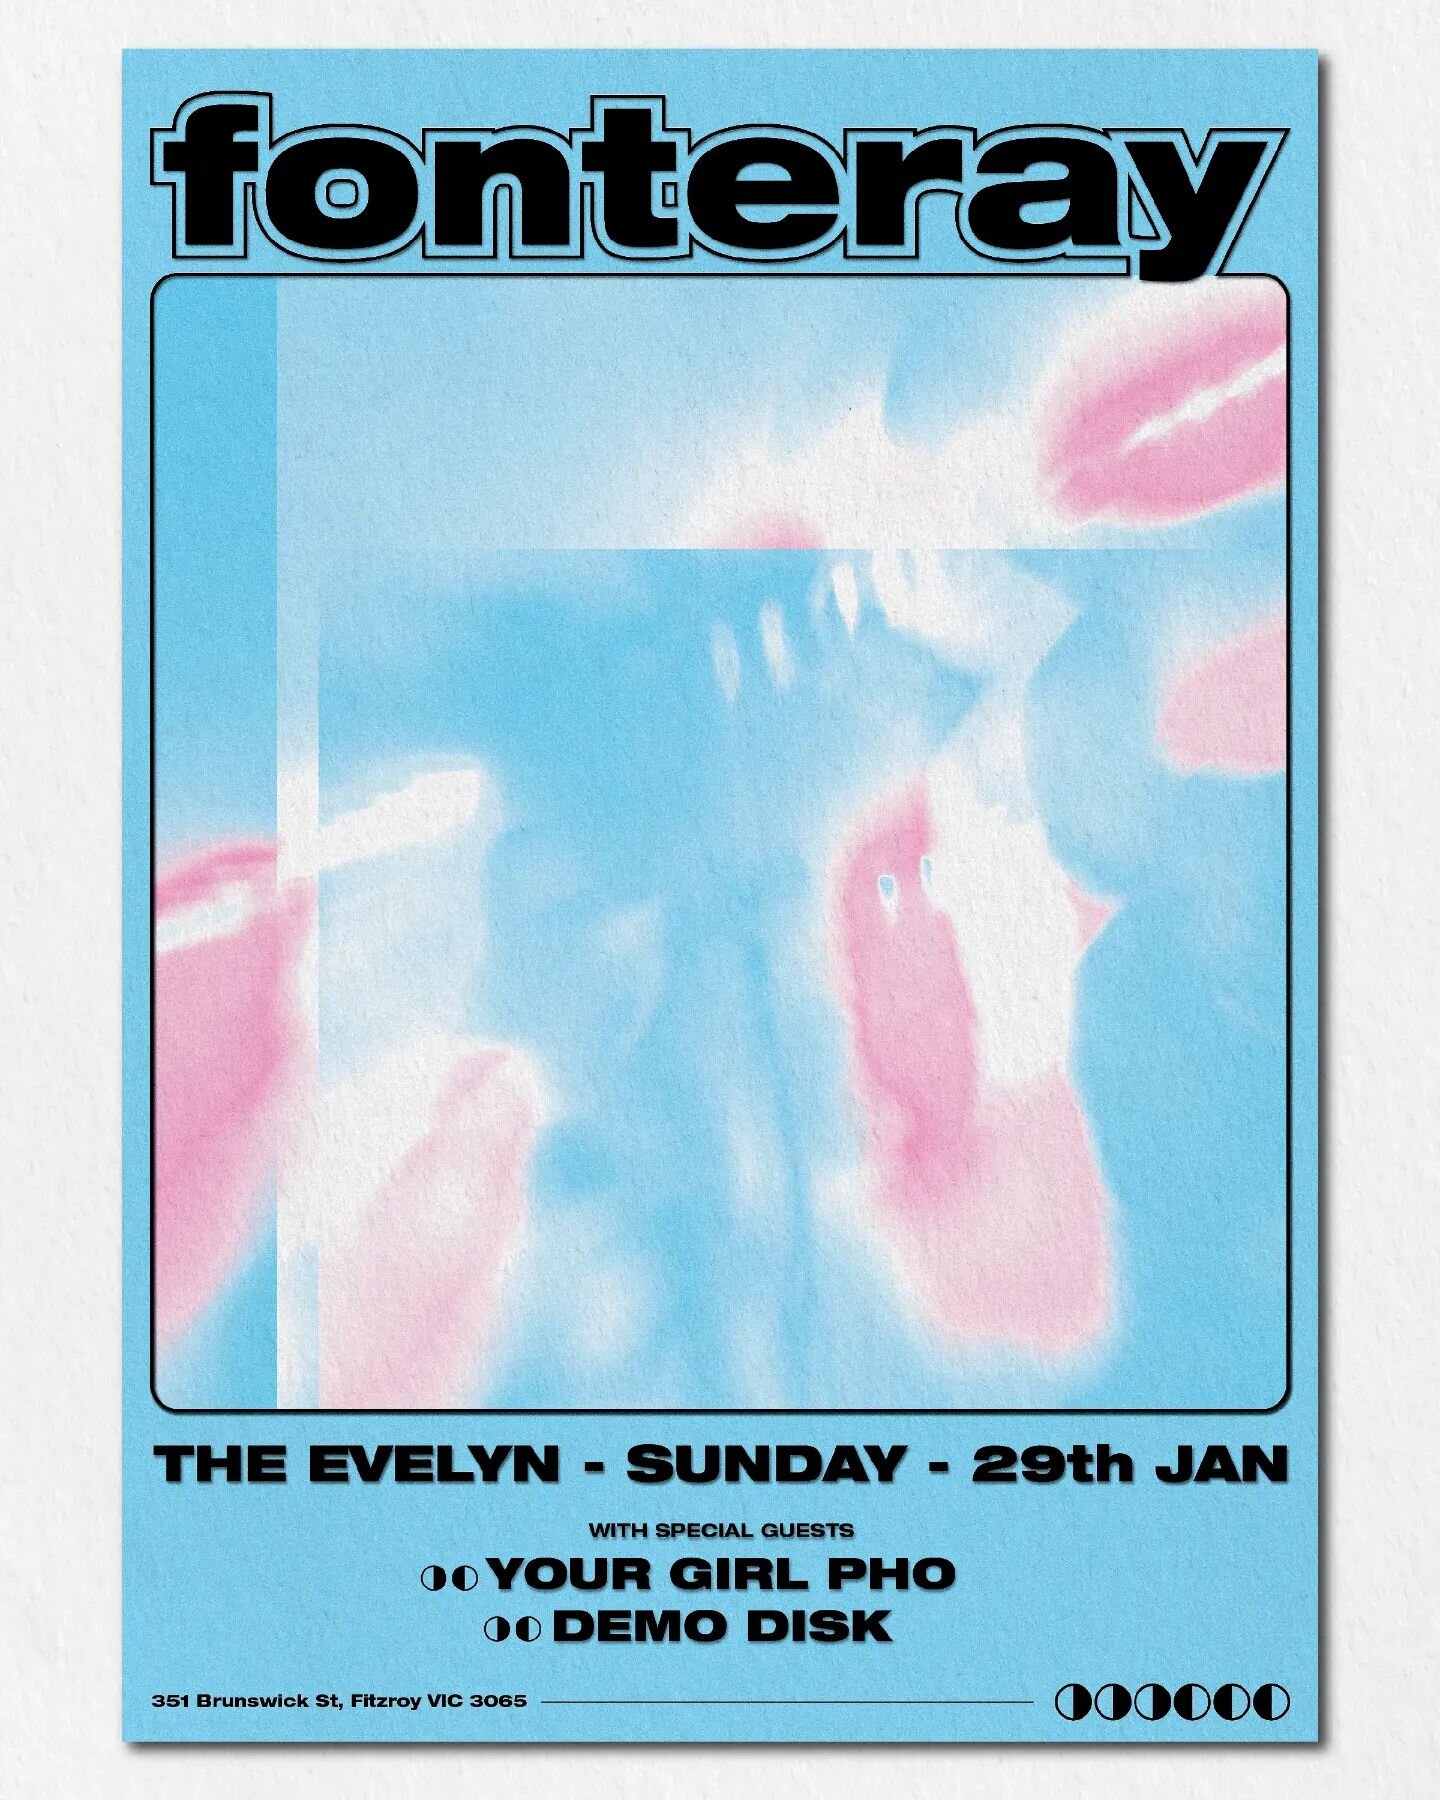 yewww! got this one coming up on the 29th of Jan with legends @fonteray.music and @yourgirlpho - so keen! 💫